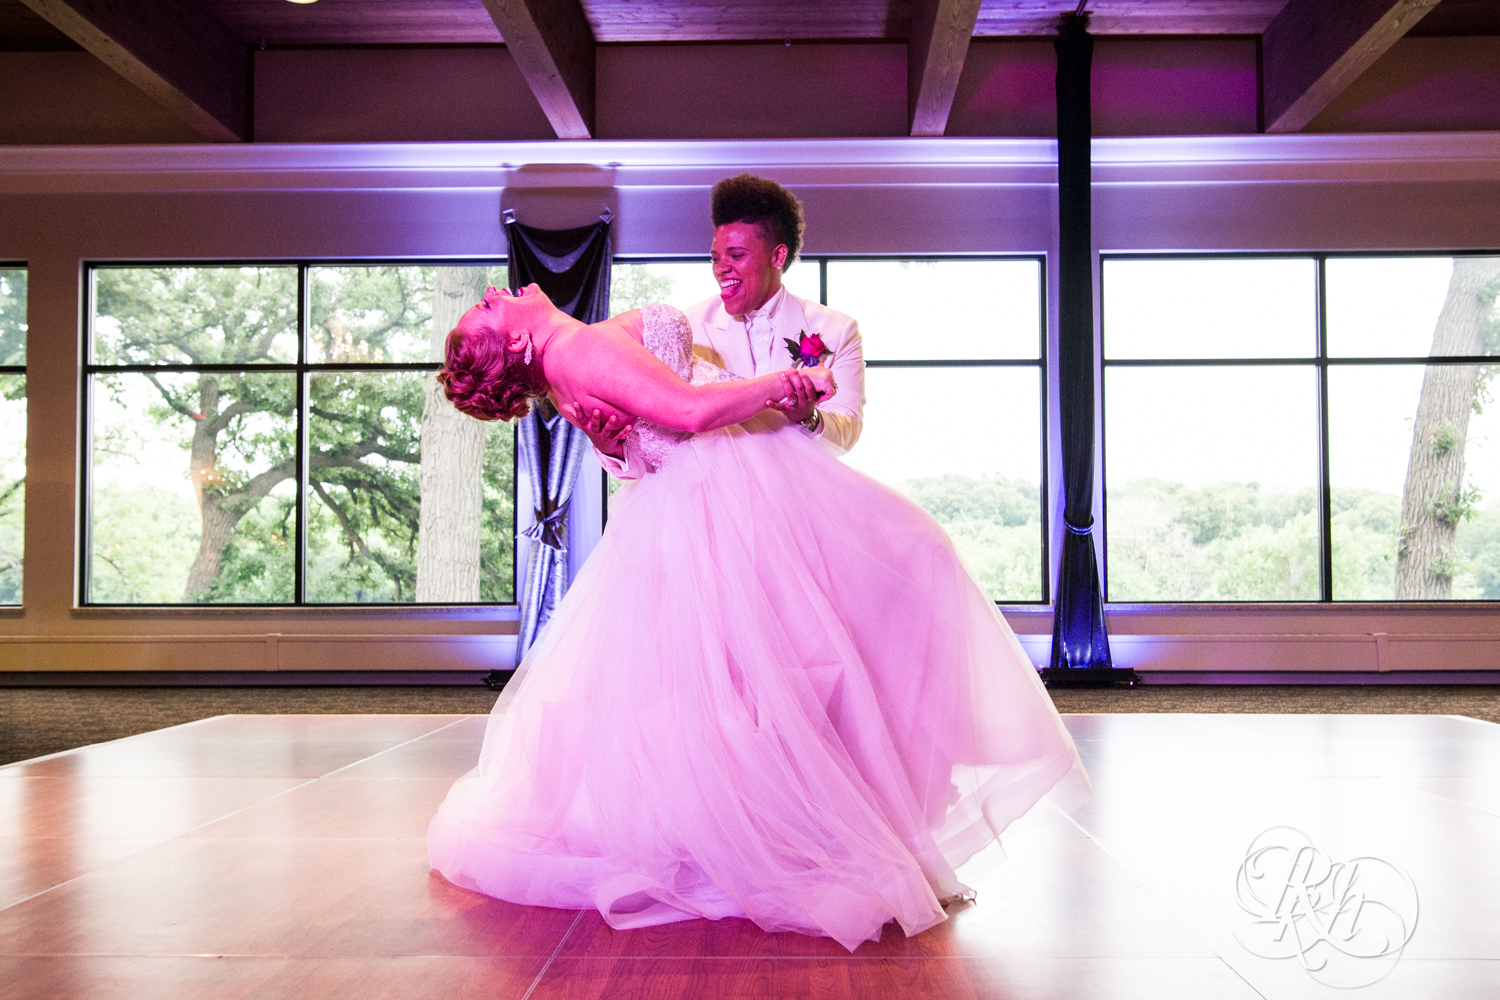 Black lesbian bride and white bride share first dance at Leopold's Mississippi Gardens in Brooklyn Park, Minnesota.